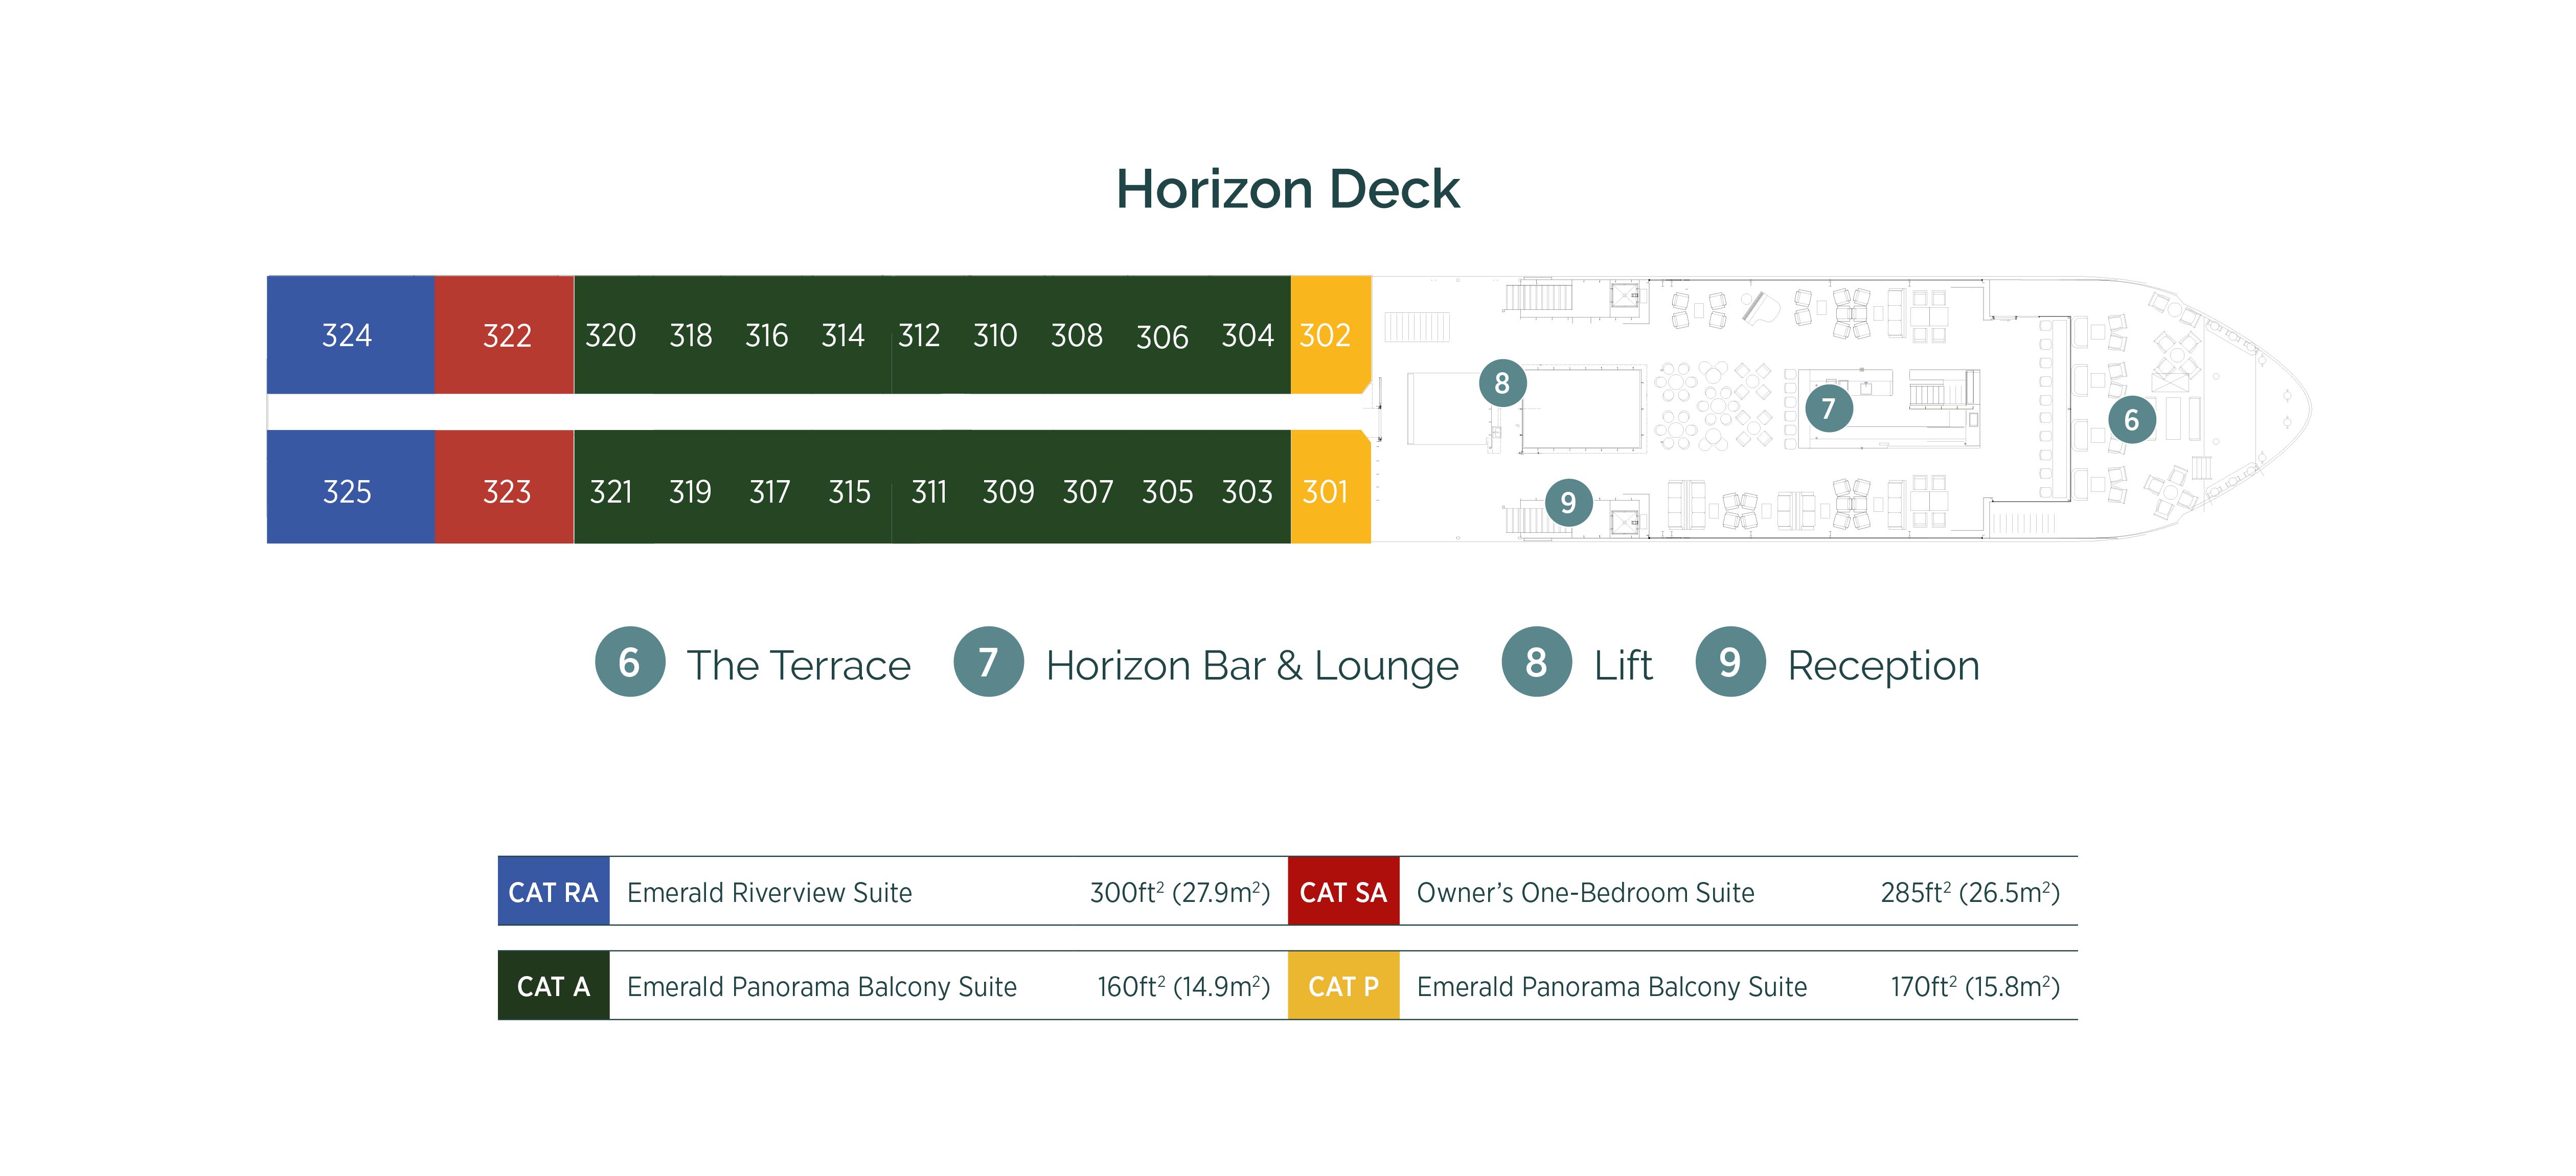 Diagram of ship layout for the Horizon Deck of Emerald Cruises’ Douro river cruising Star-Ship, Emerald Radiance